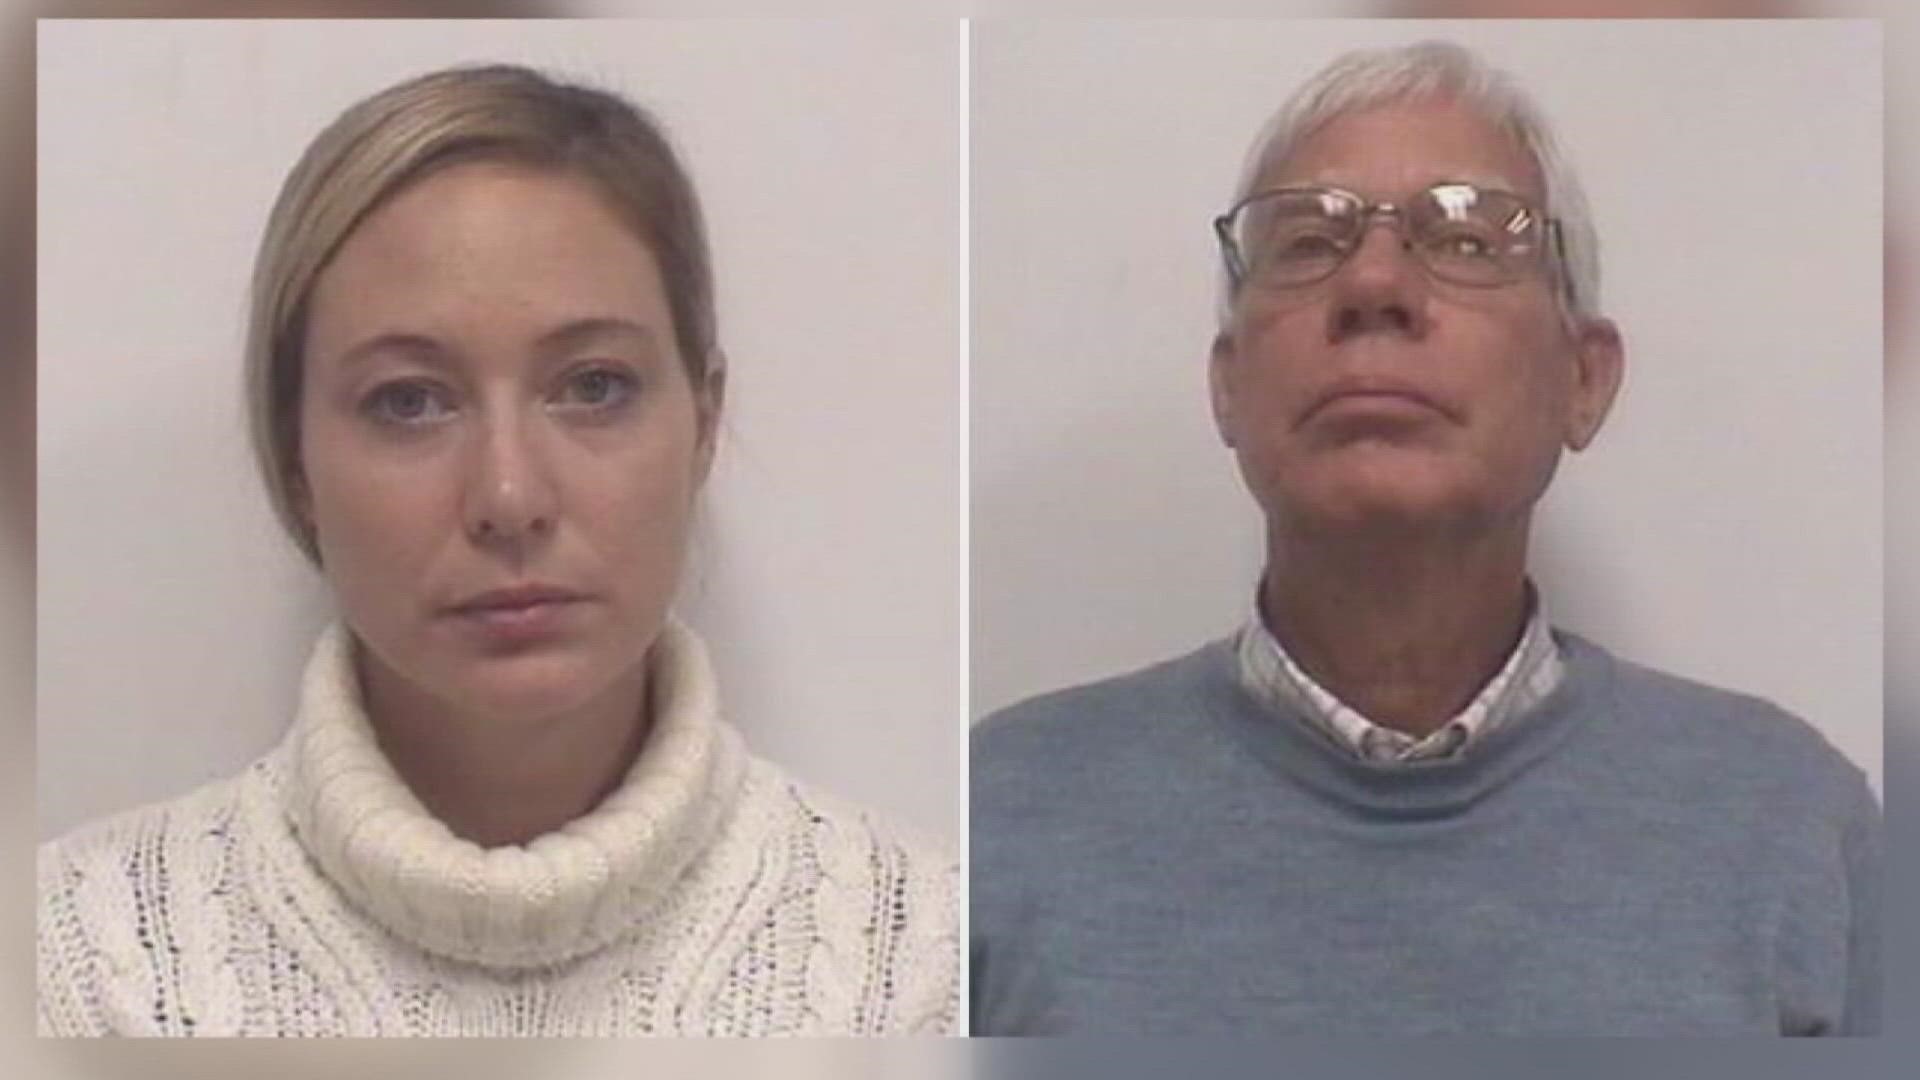 Tom Martens and Molly Corbett were initially convicted on a murder charge. They’re getting a new trial after the state supreme court overruled that ruling.